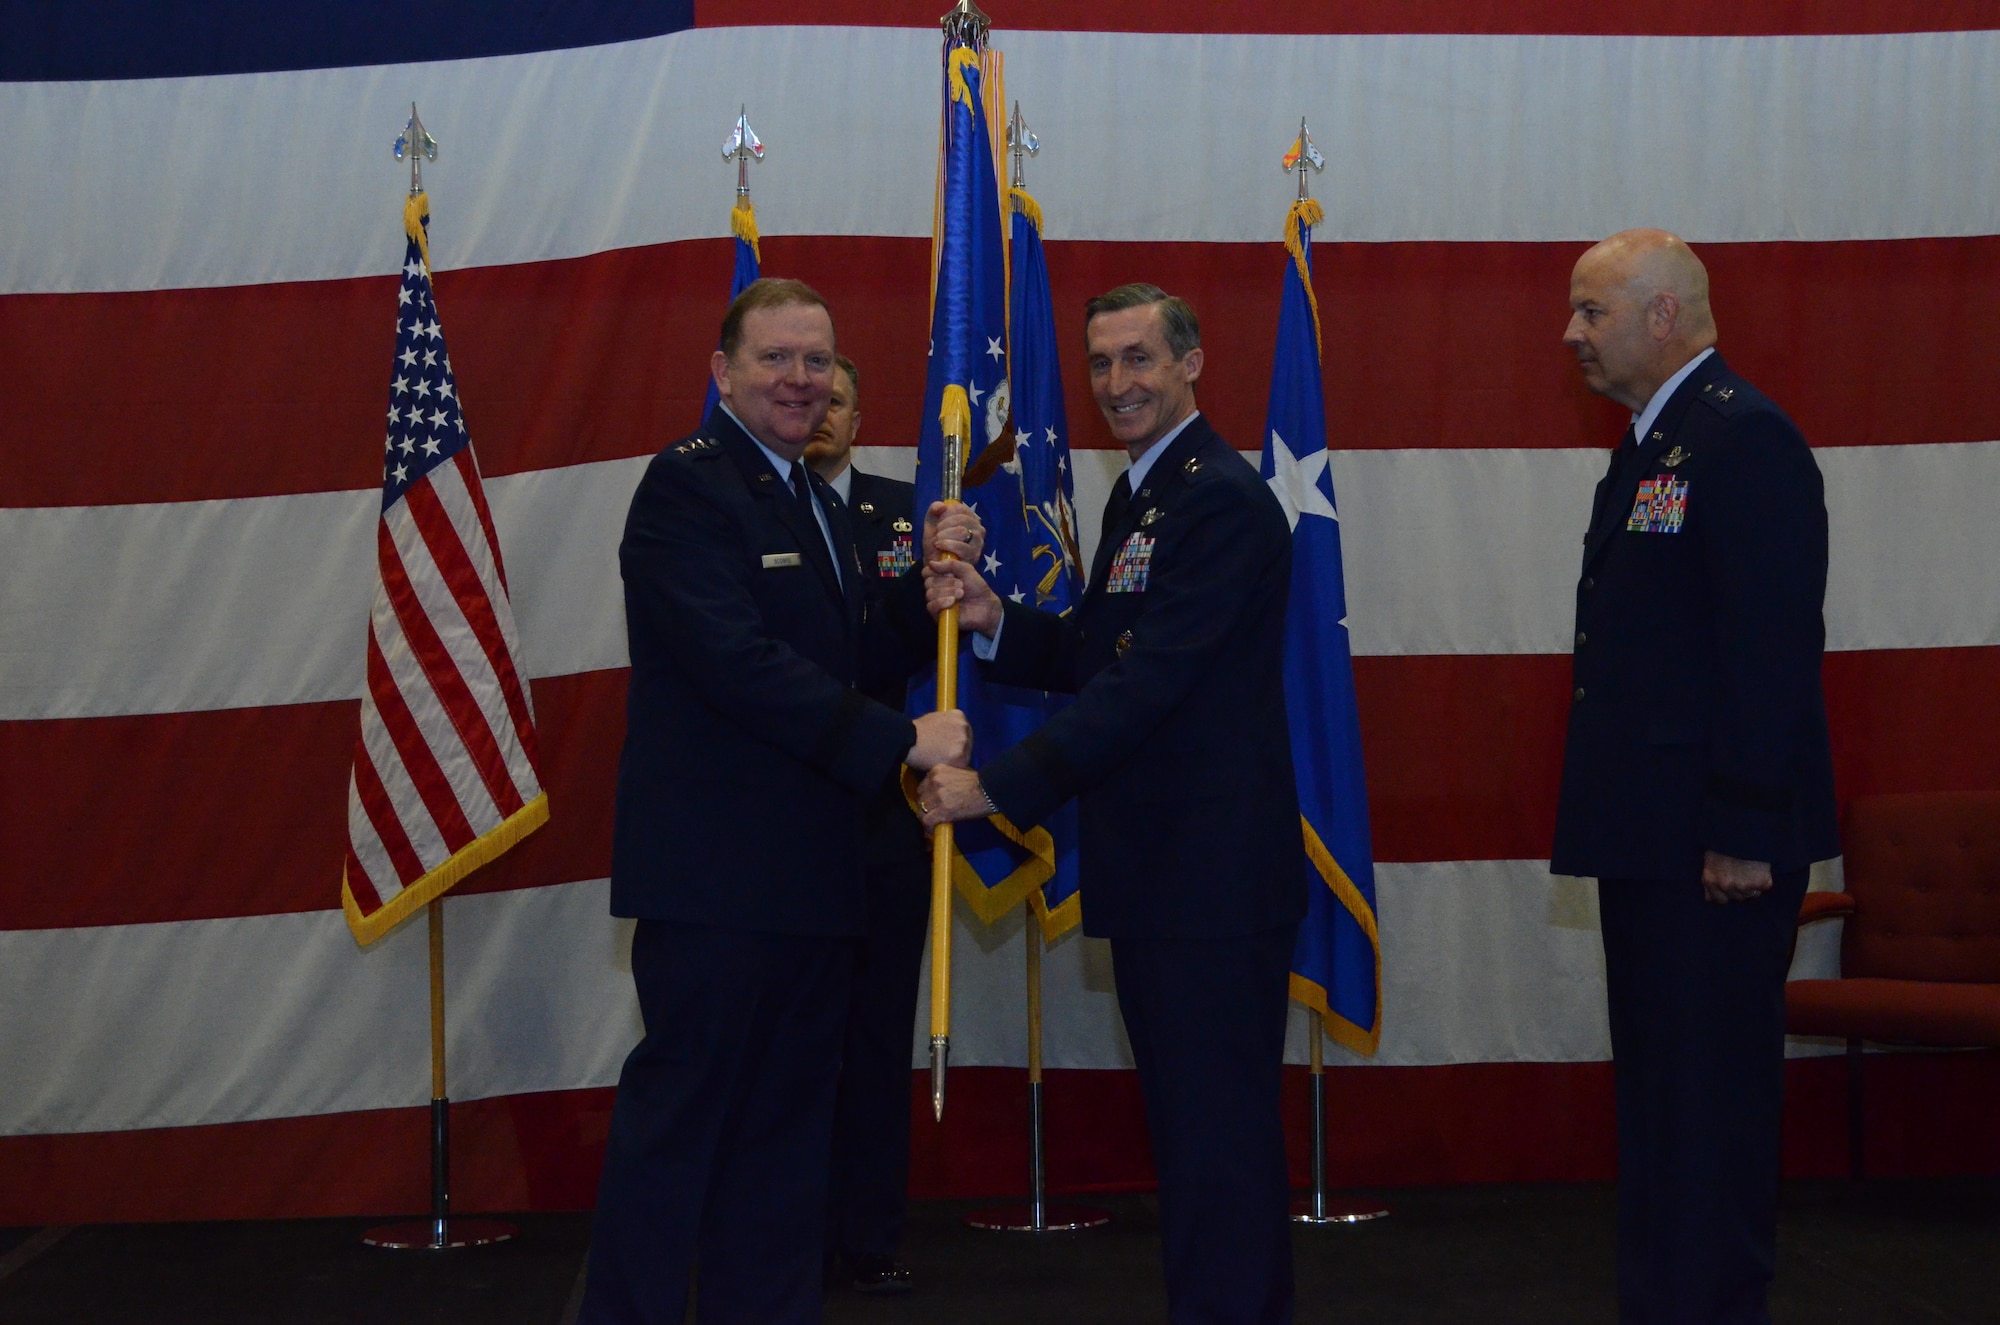 Maj. Gen. Ronald B. "Bruce" Miller returns the flag to Lt. Gen. Richard W. Scobee, signifying the end of his time as Tenth Air Force Commander during the Tenth Air Force Change of Command ceremony, May 10, at Naval Air Station Fort Worth Joint Reserve Base, Texas